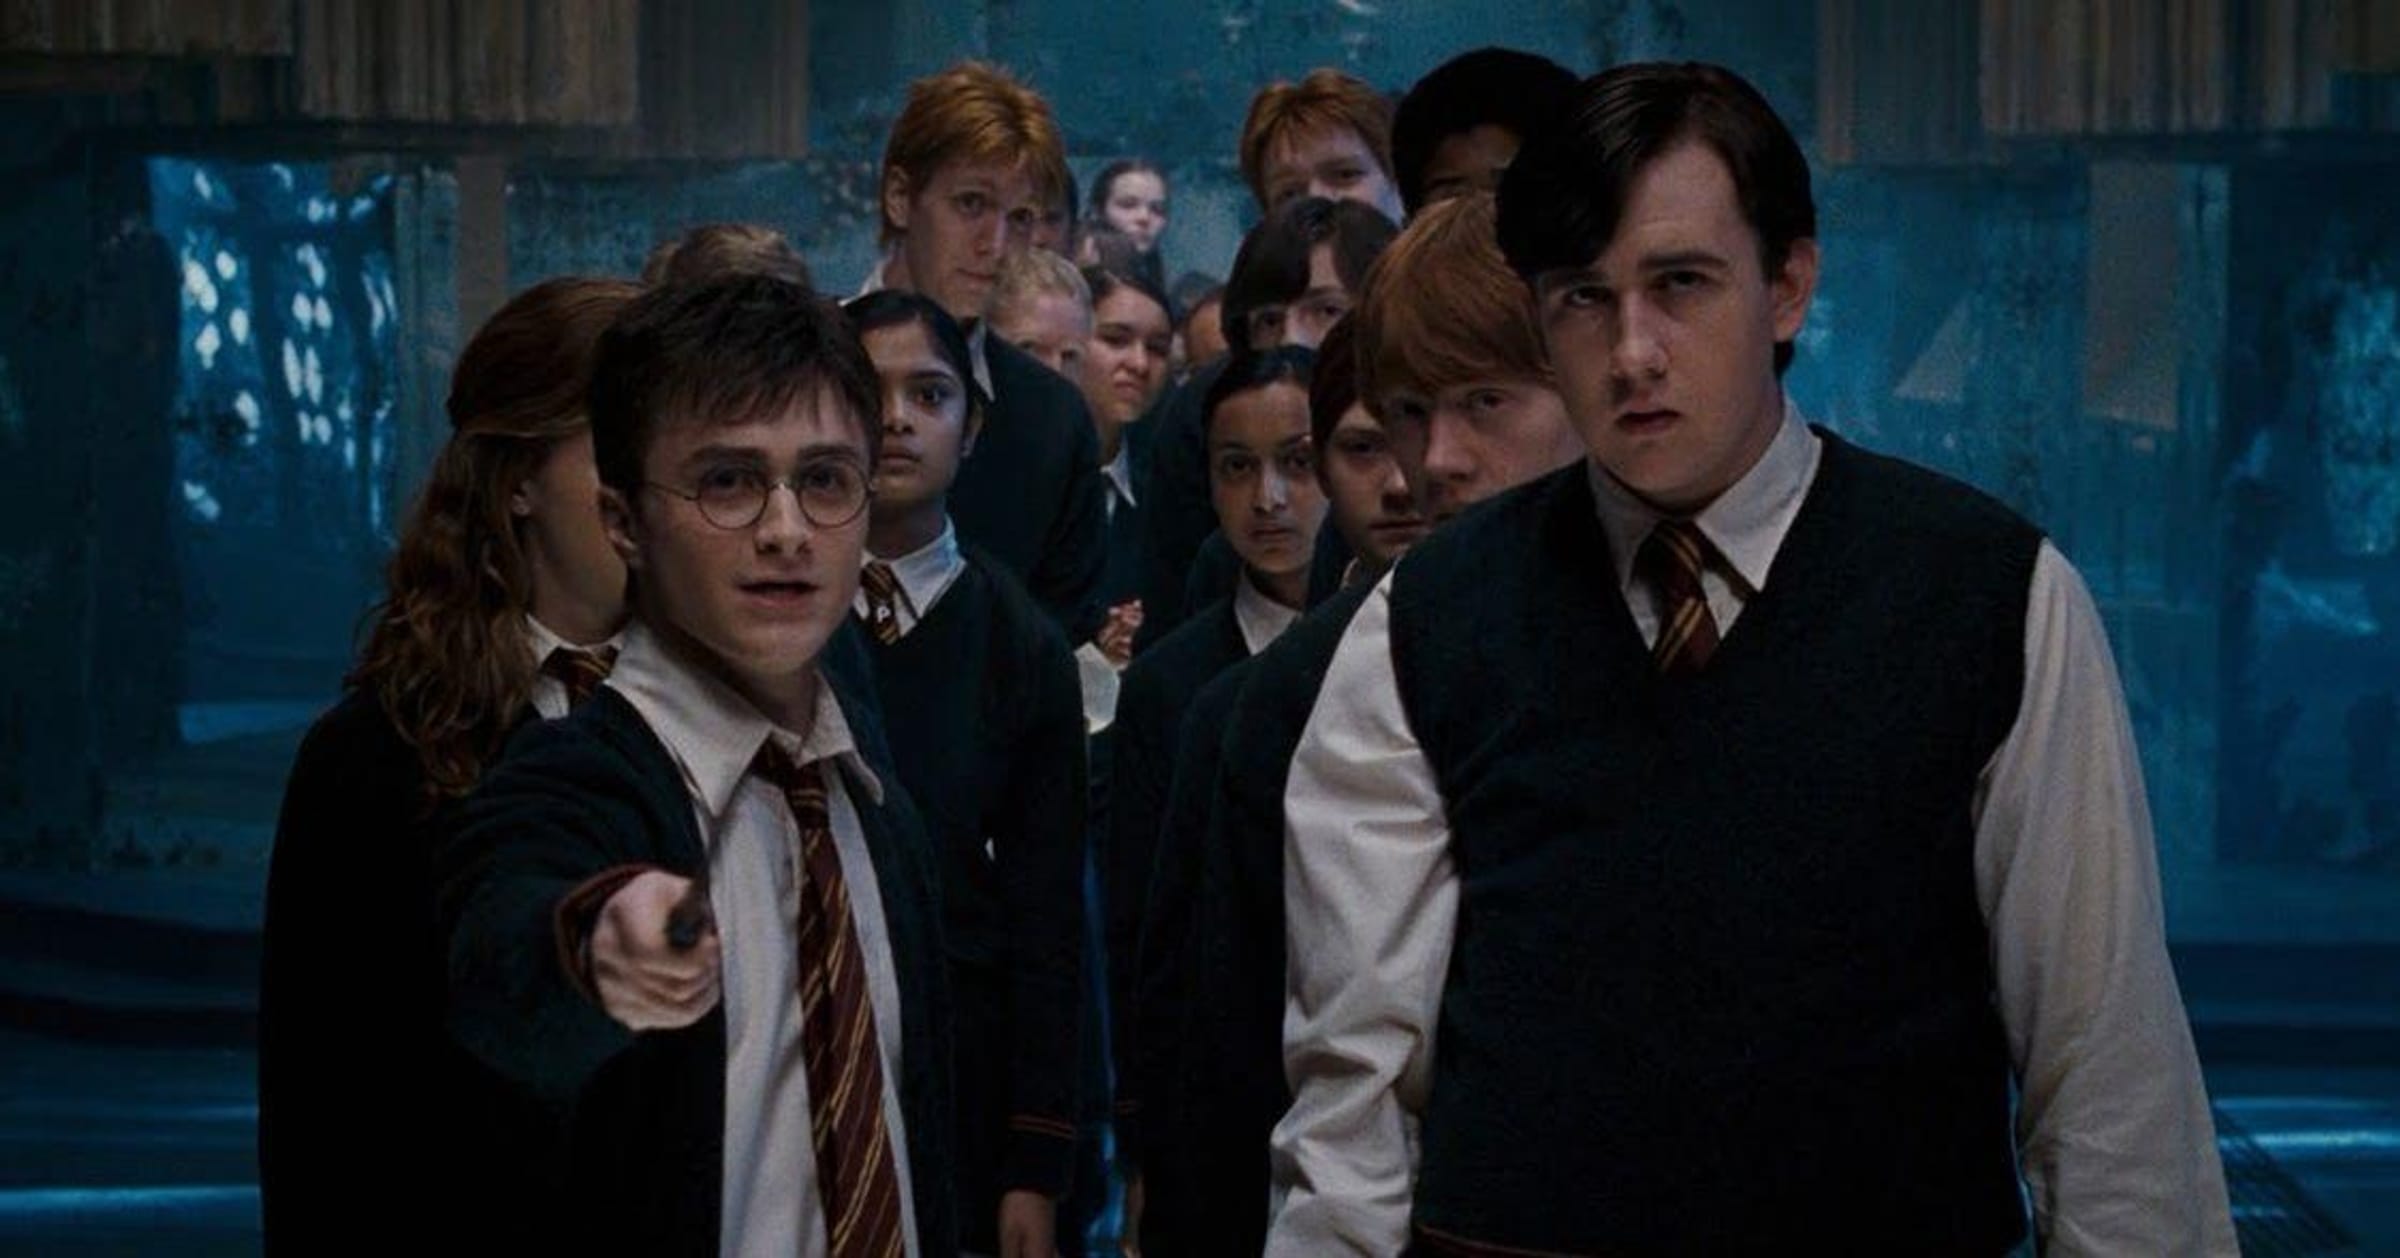 This is your 'Harry Potter' character based on your zodiac sign